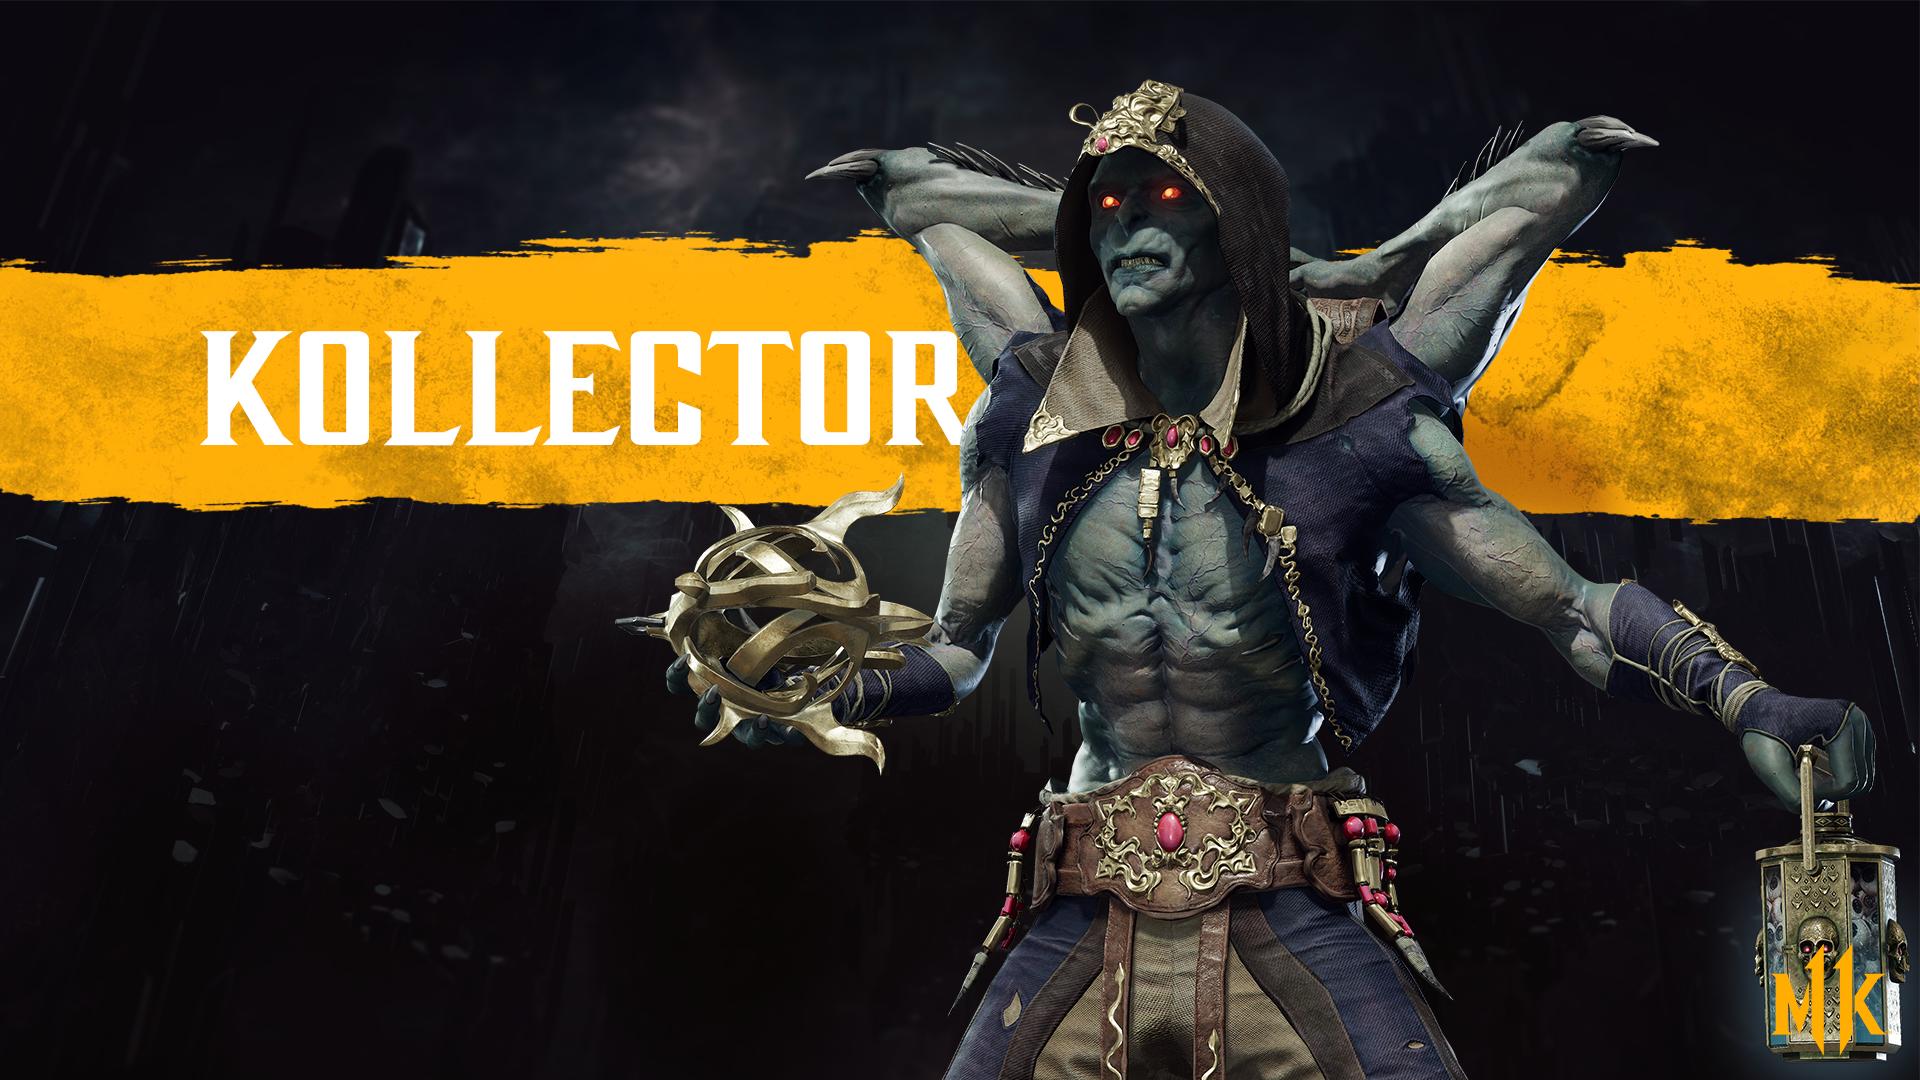 Ed Boon on The Kollector is MK11s new fighter https